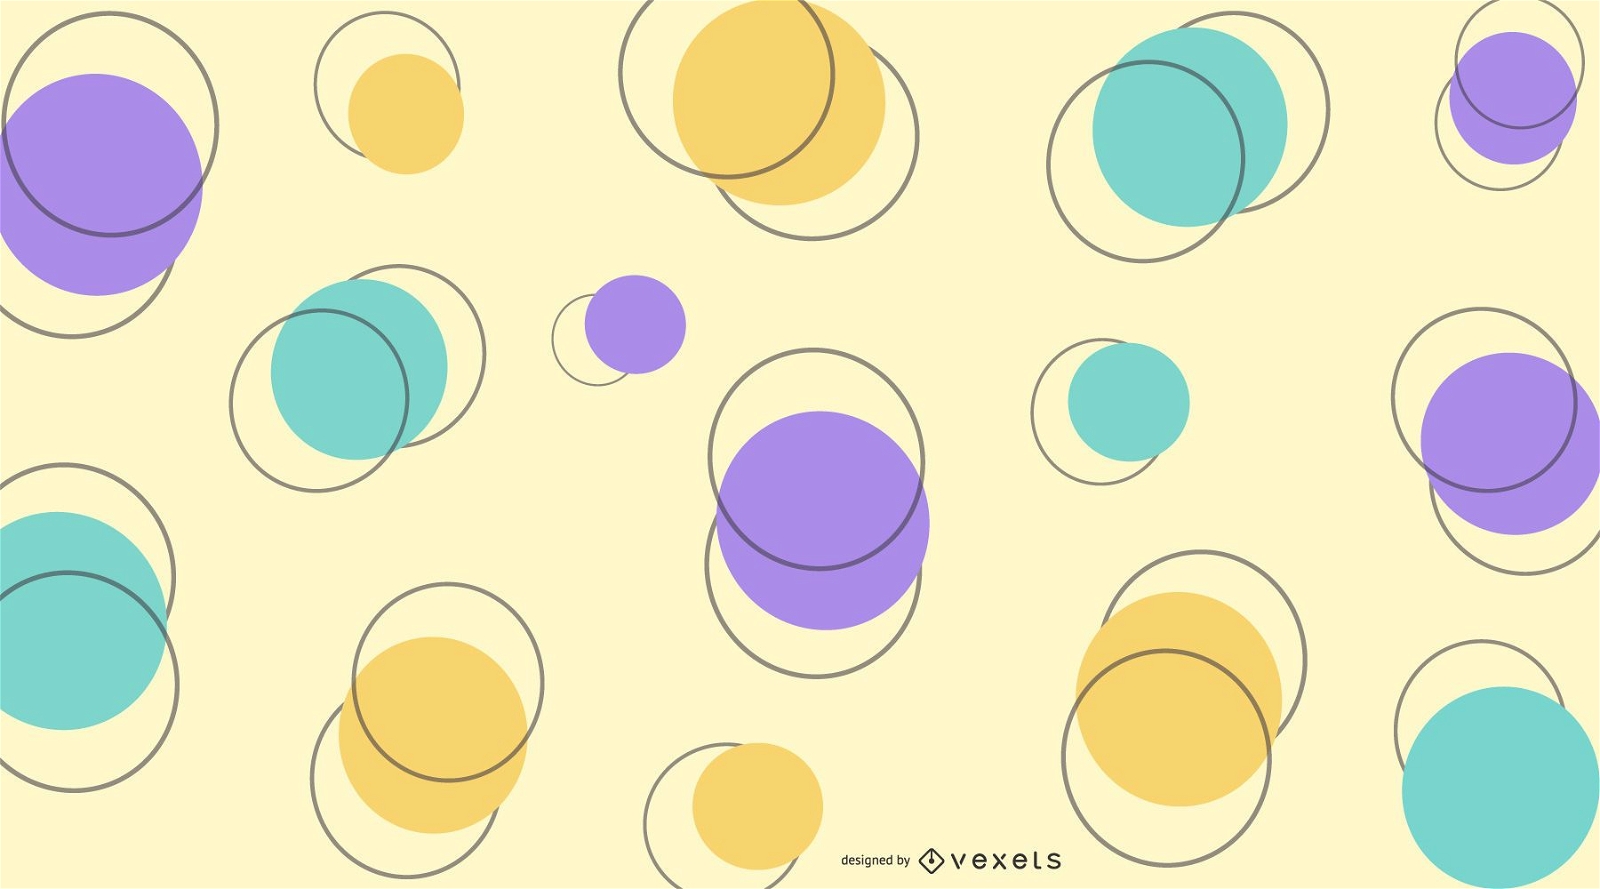 Colorful circle shapes background design